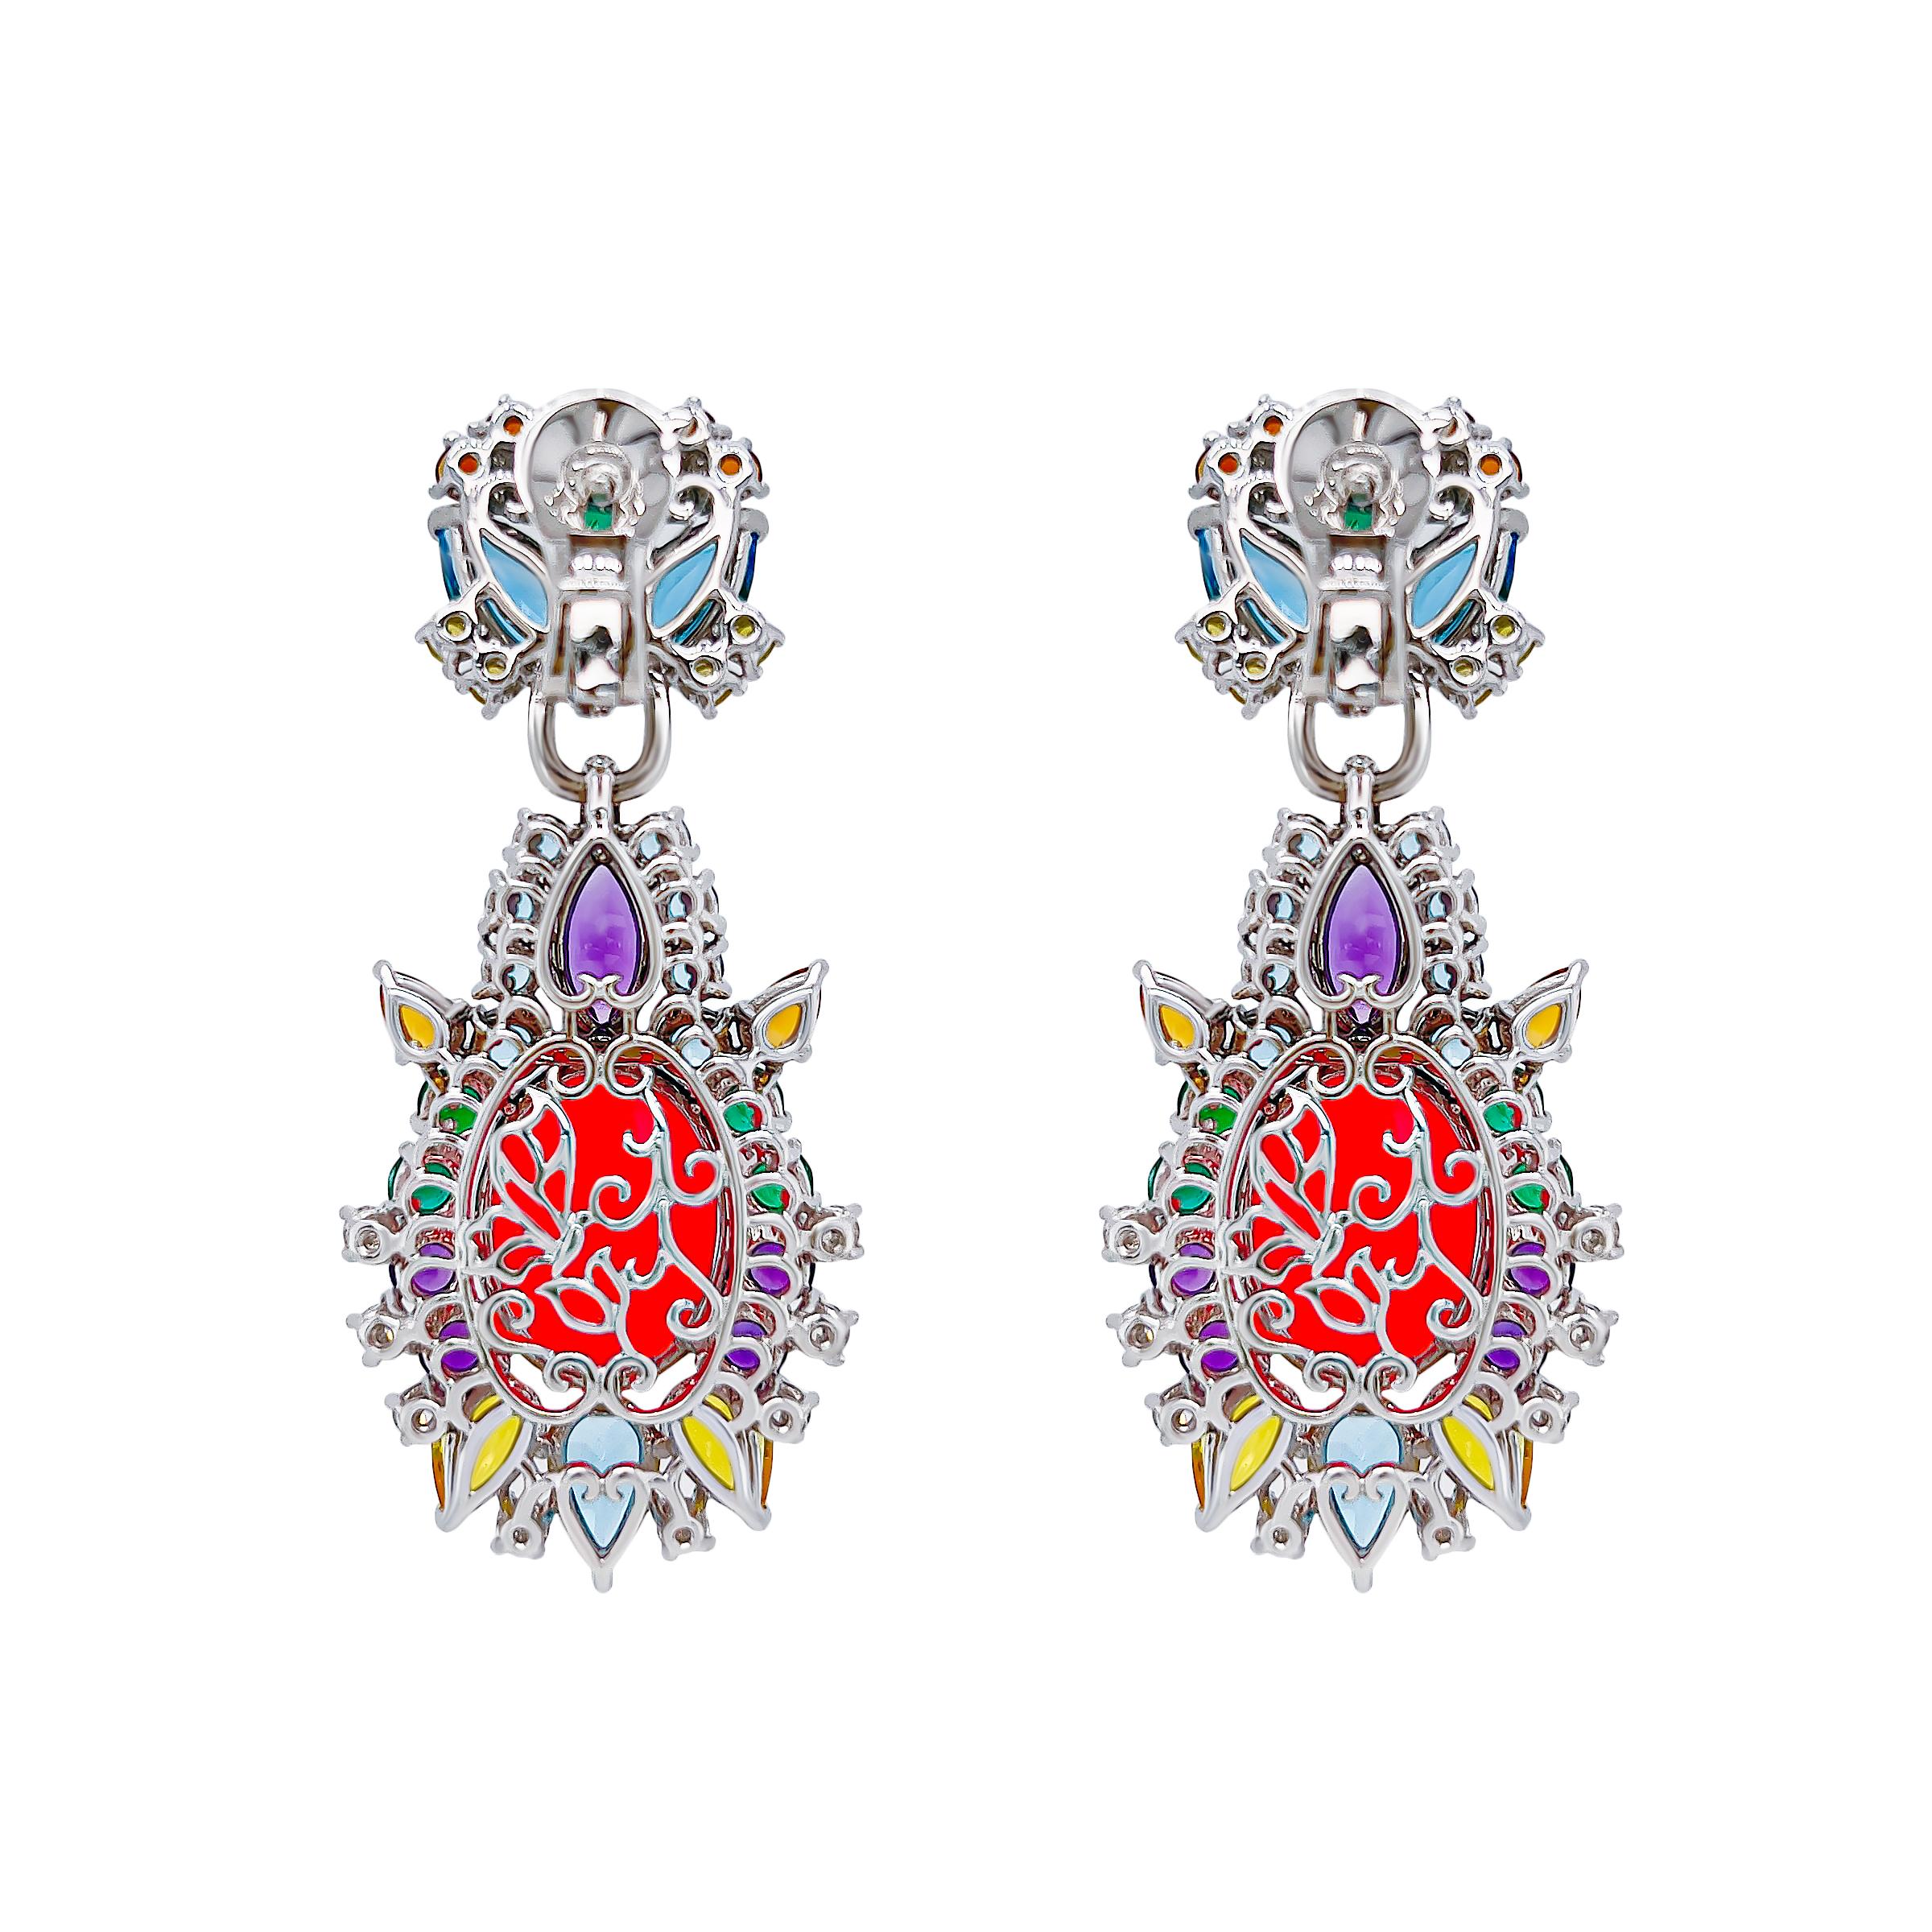 Show stopping hot pink opals weighing 13.38 carats are the centrepiece of these 18k white gold earrings. The pink orbs of pure magnetism are surrounded by hand selected natural coloured gems including, emerald, yellow sapphire, citrine, amethyst and